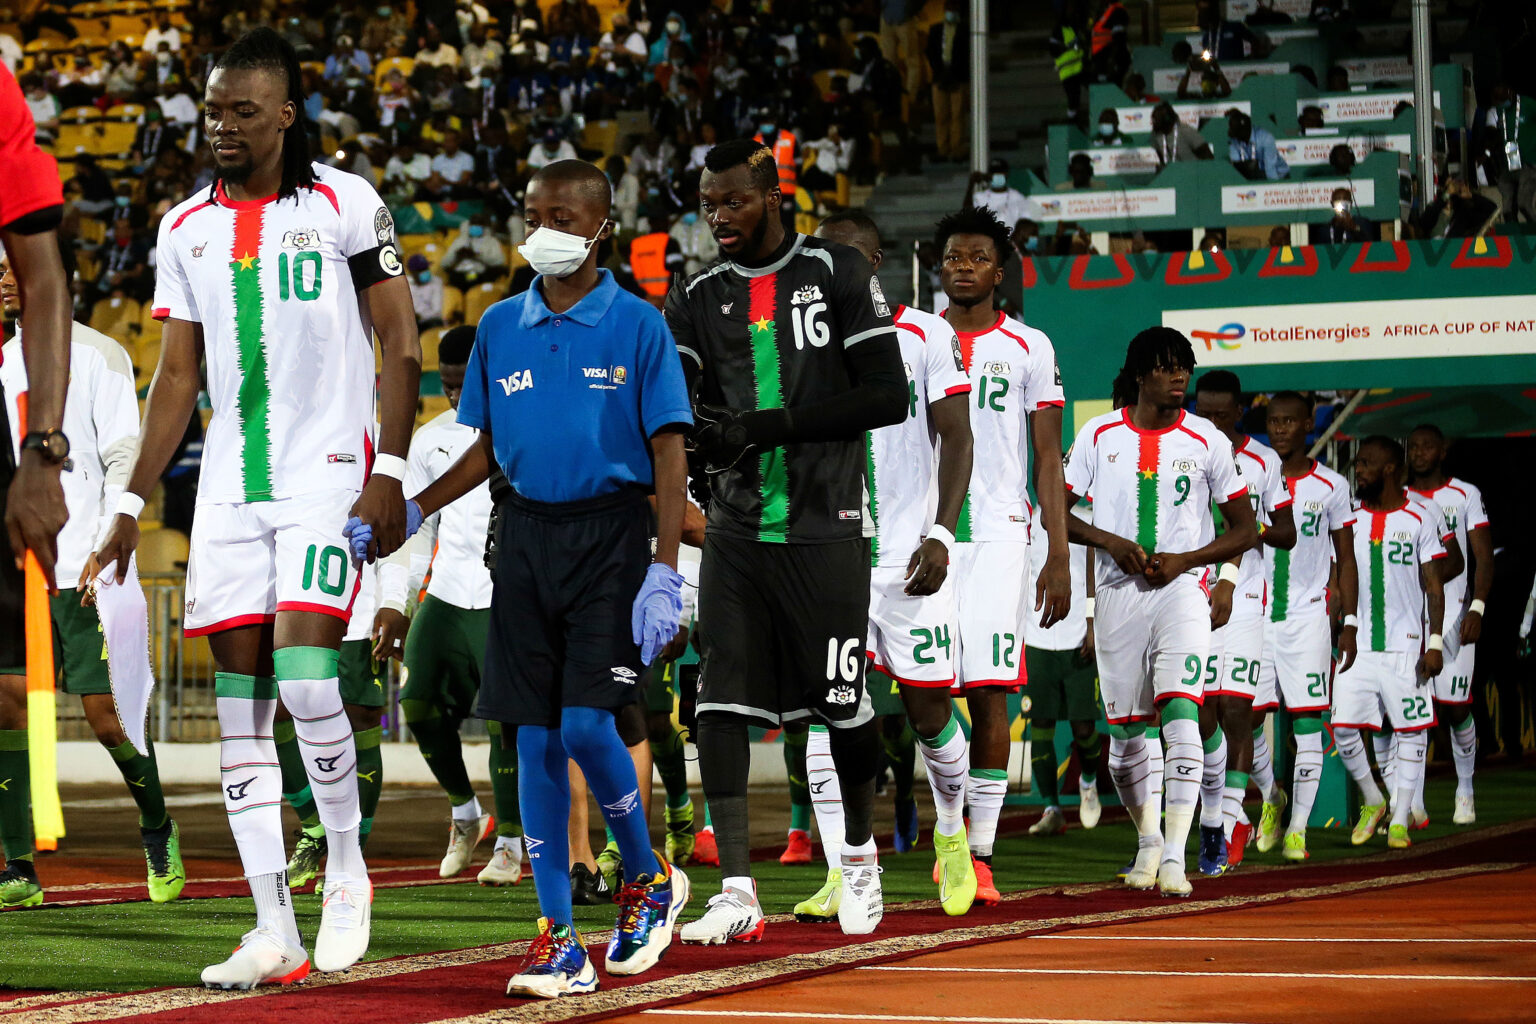 Burkina Faso captain Bertrand Traore leads his players out with the Visa Mascot during the 2021 Africa Cup of Nations Afcon Finals Semifinal match between Burkina Faso and Senegal held at Ahmadou Ahidjo Stadium in Yaounde, Cameroon on 02 February 2022 ©Shaun Roy/Sports Inc - Photo by Icon sport